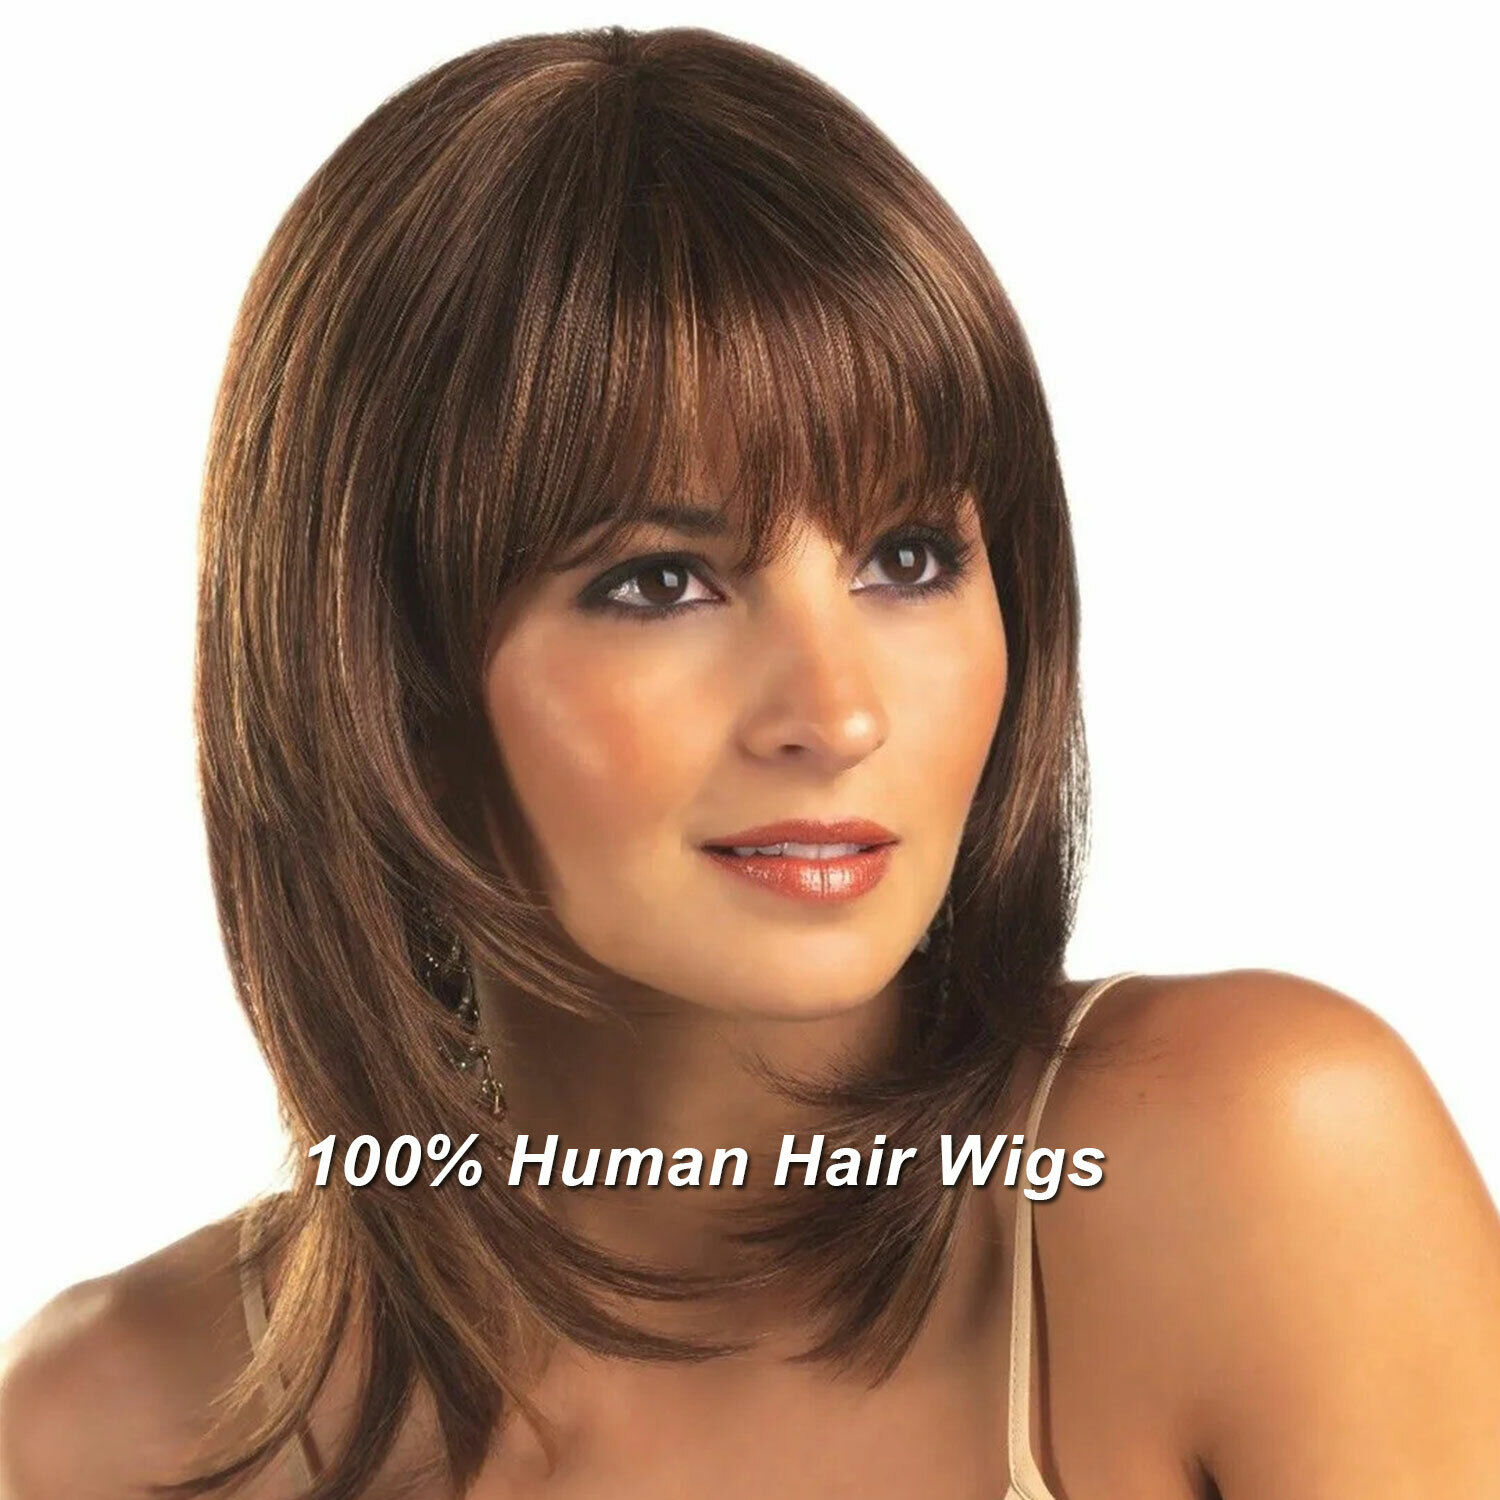 100%Real Remy Indian Human Hair Wig With Bangs Bob Style Straight Full Wig  Brown | eBay